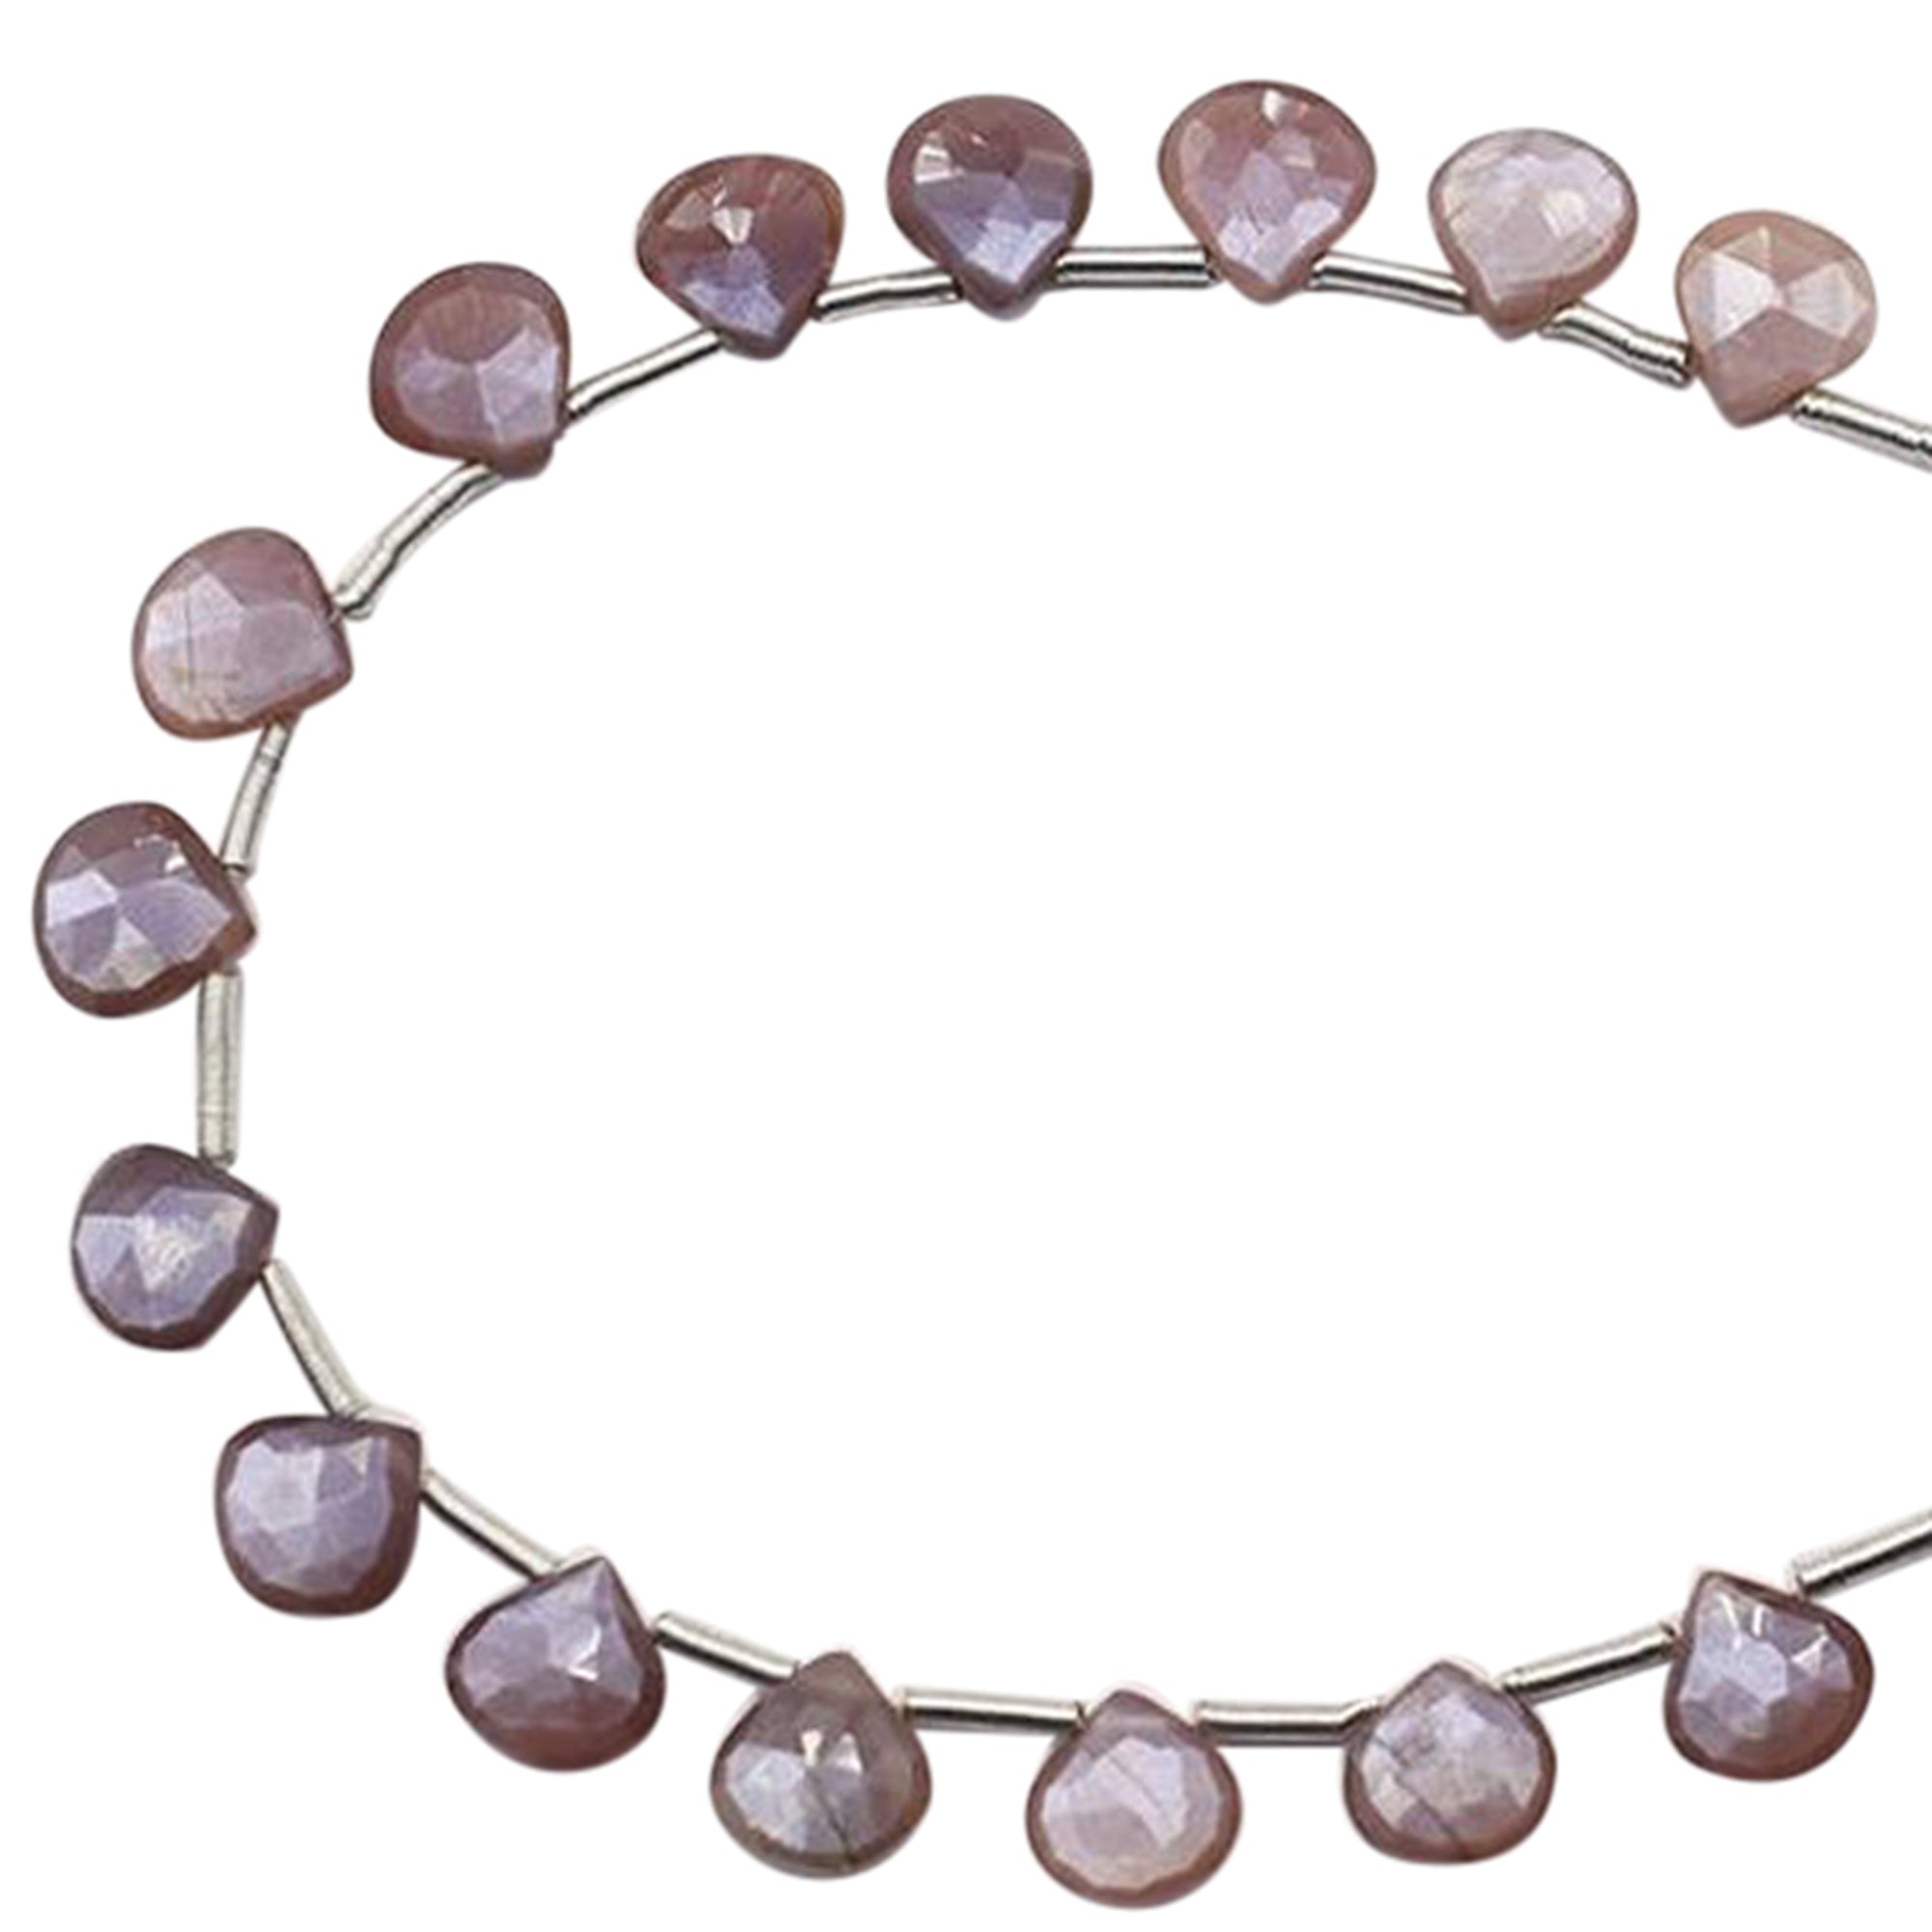 Brown Chocolate Moonstone 8 To 9 MM Faceted Heart Shape Beads Strand